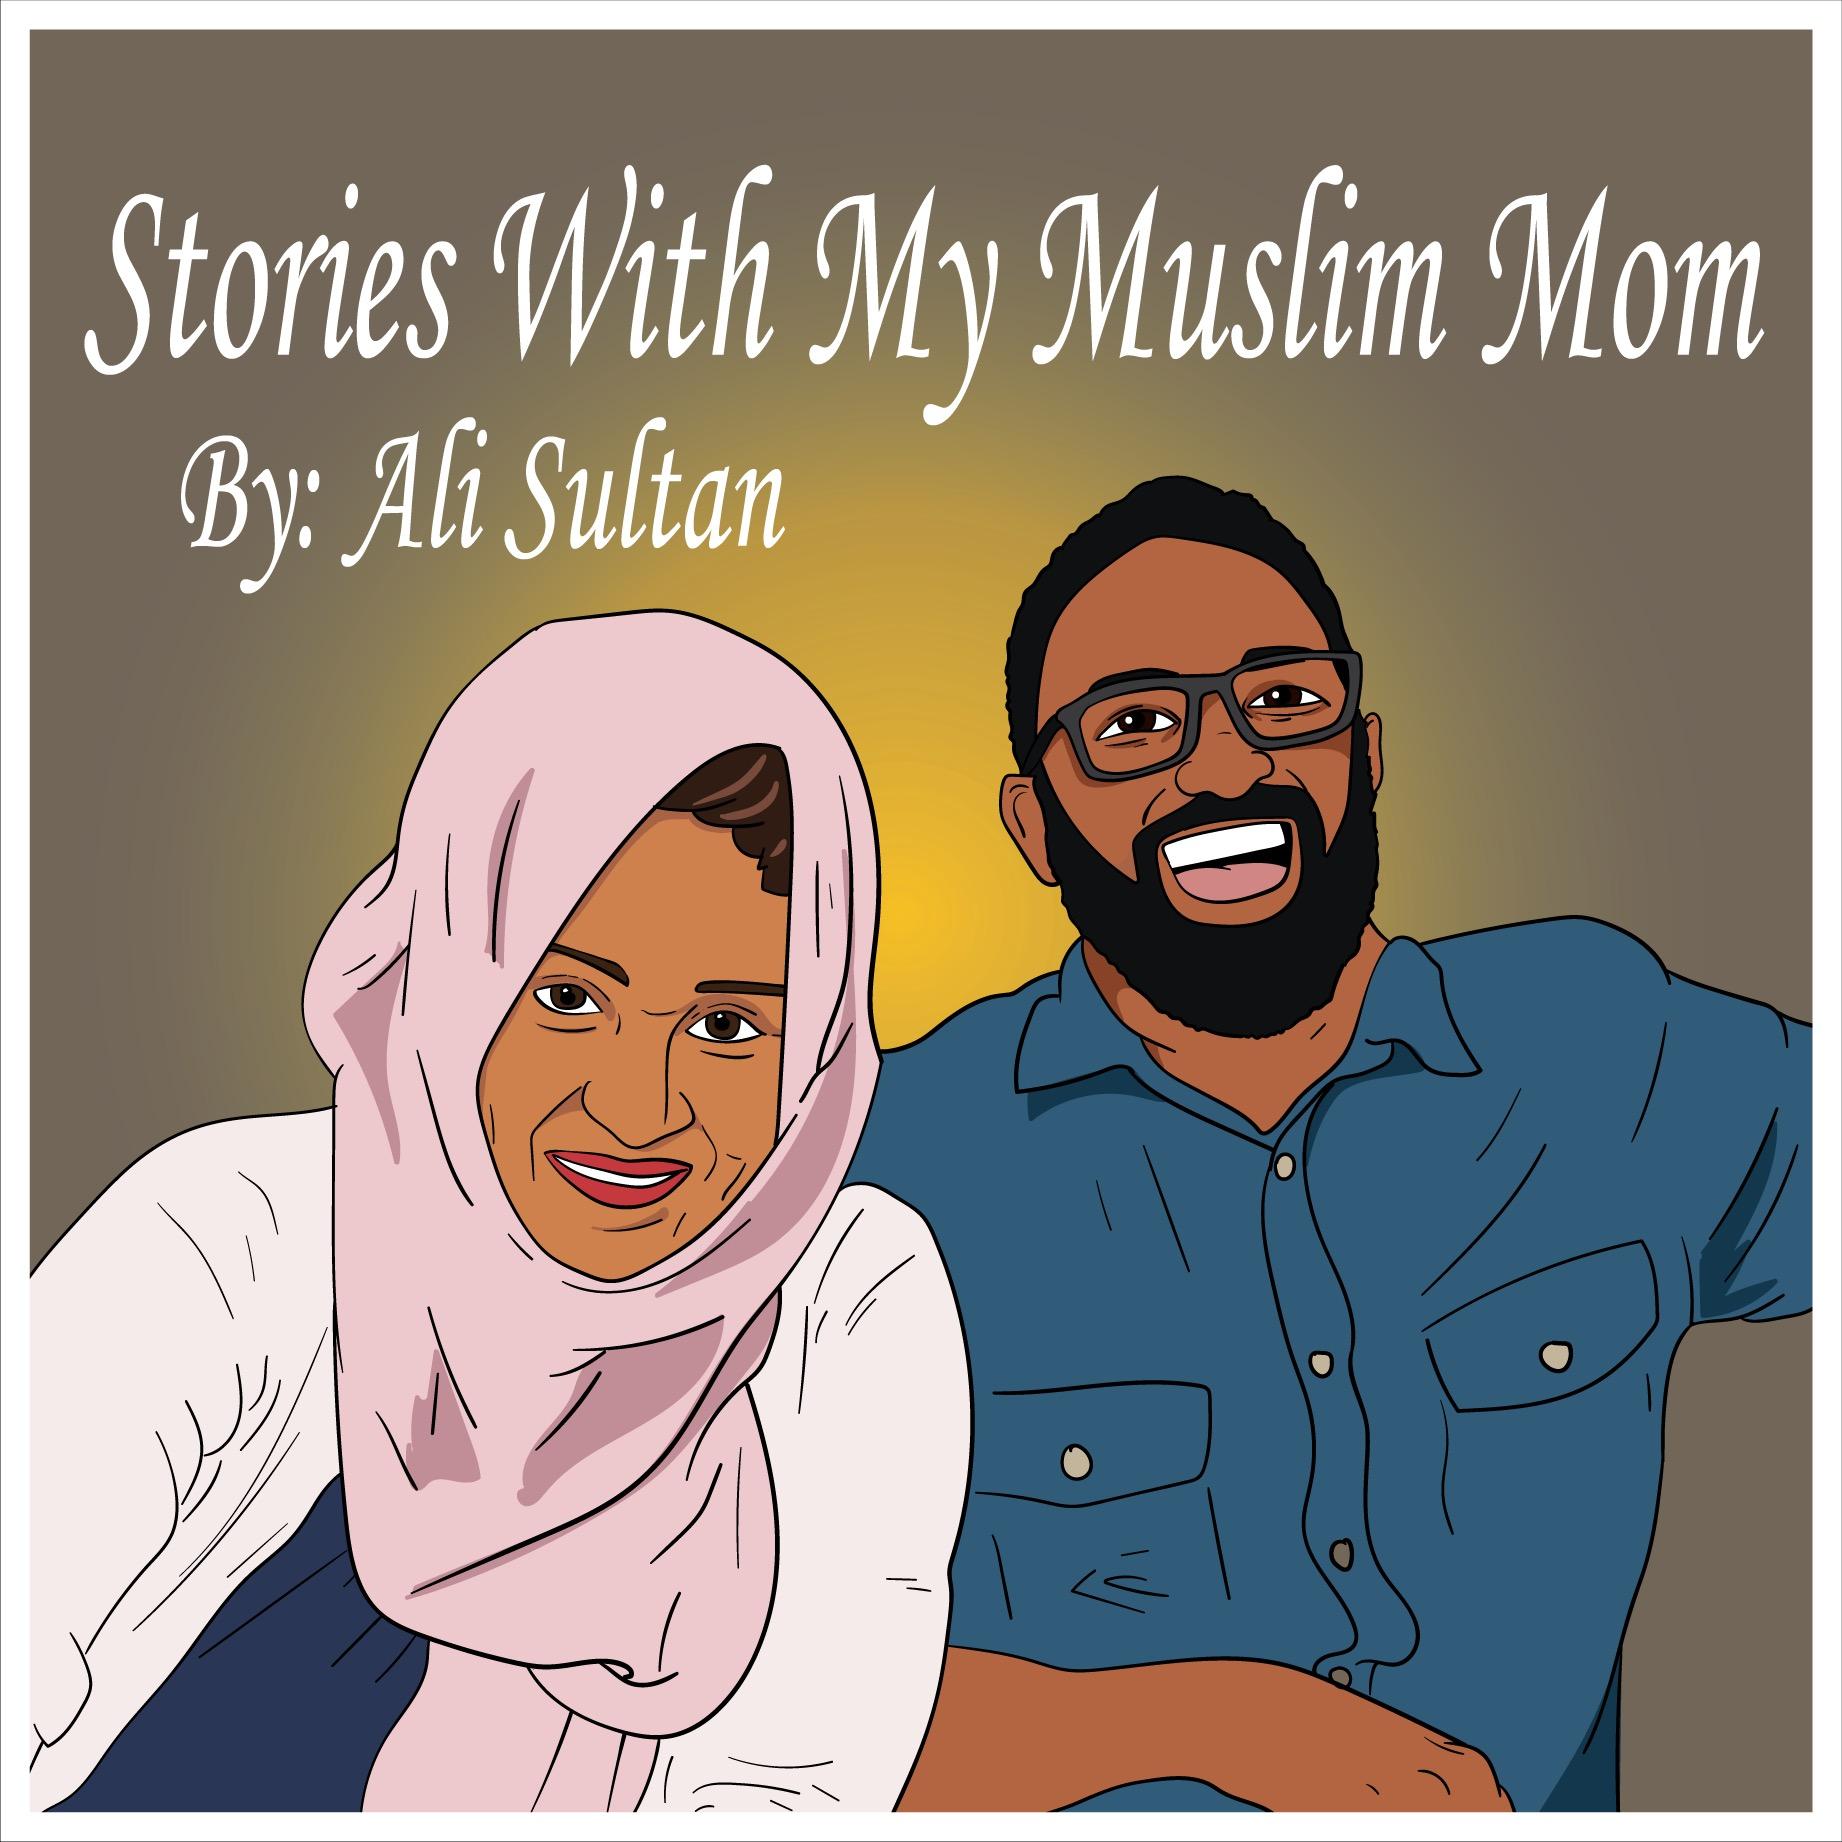 Stories with my muslim mom